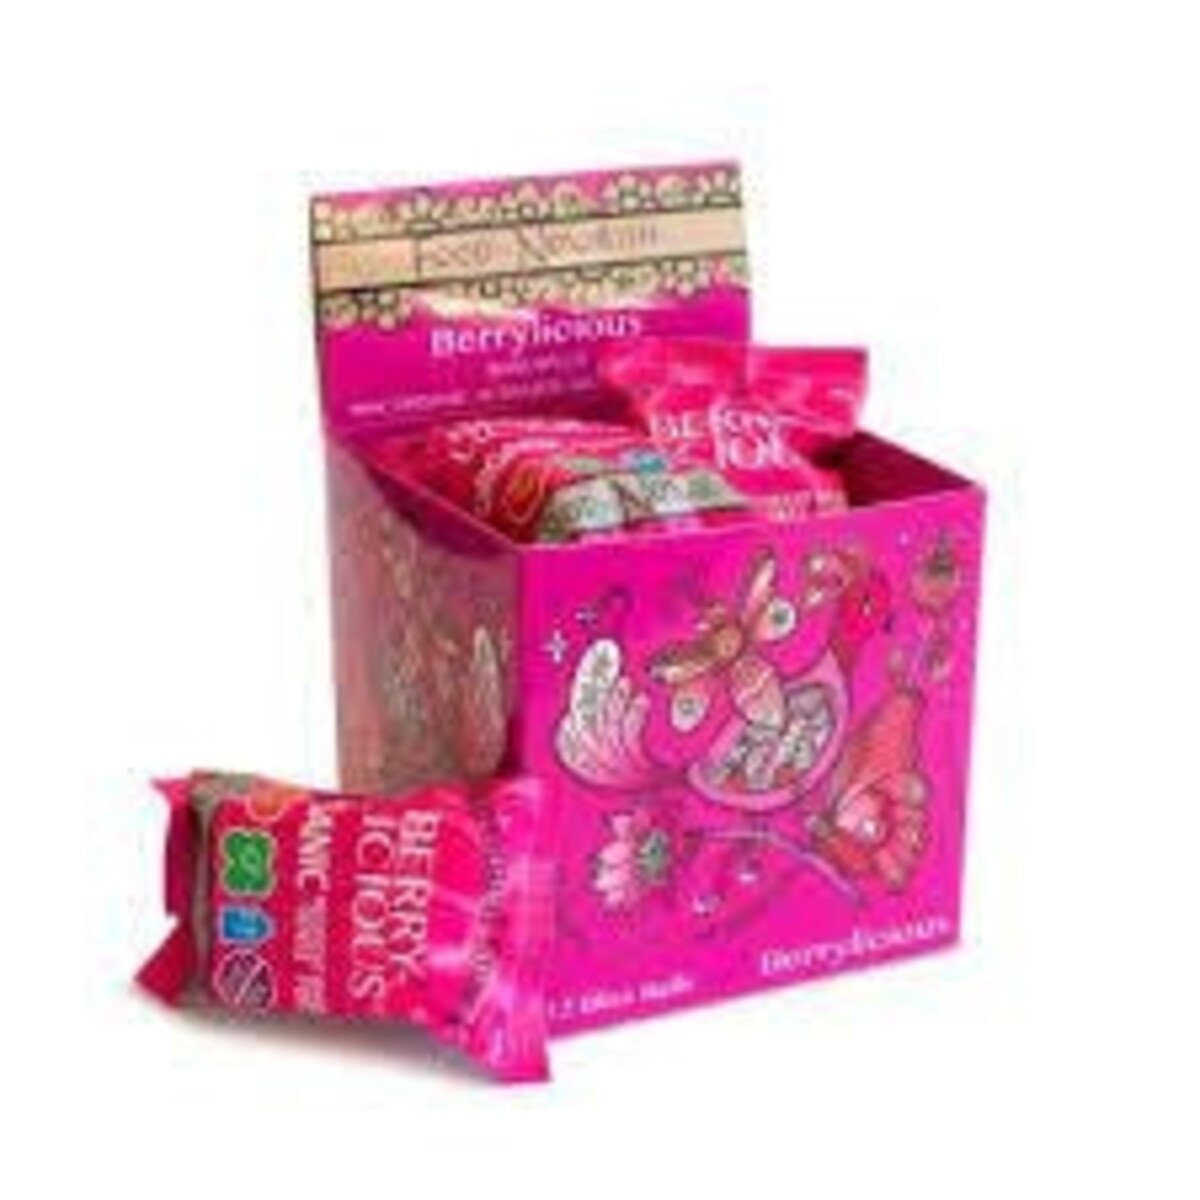 Food to Nourish Berrylicious Sprouted Snack 12x 45g